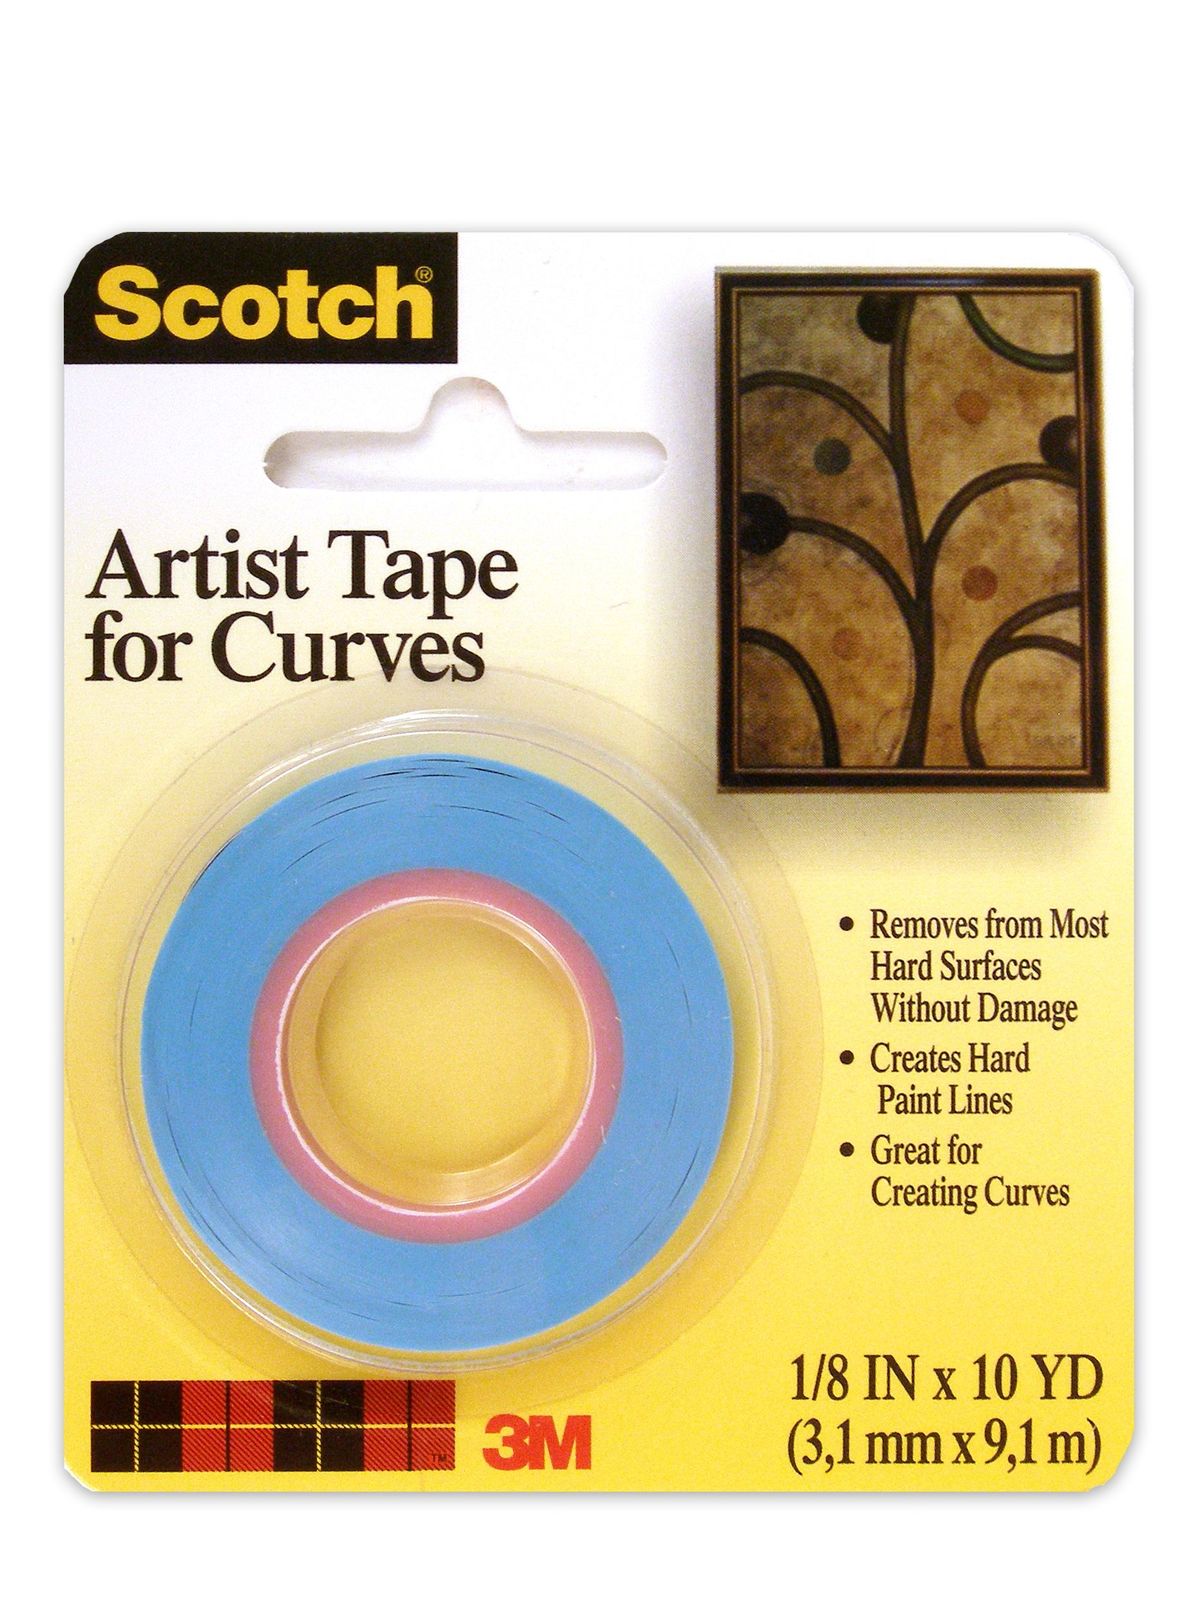 Scotch Artist Tape For Curves 1 8 In. X 10 Yd.